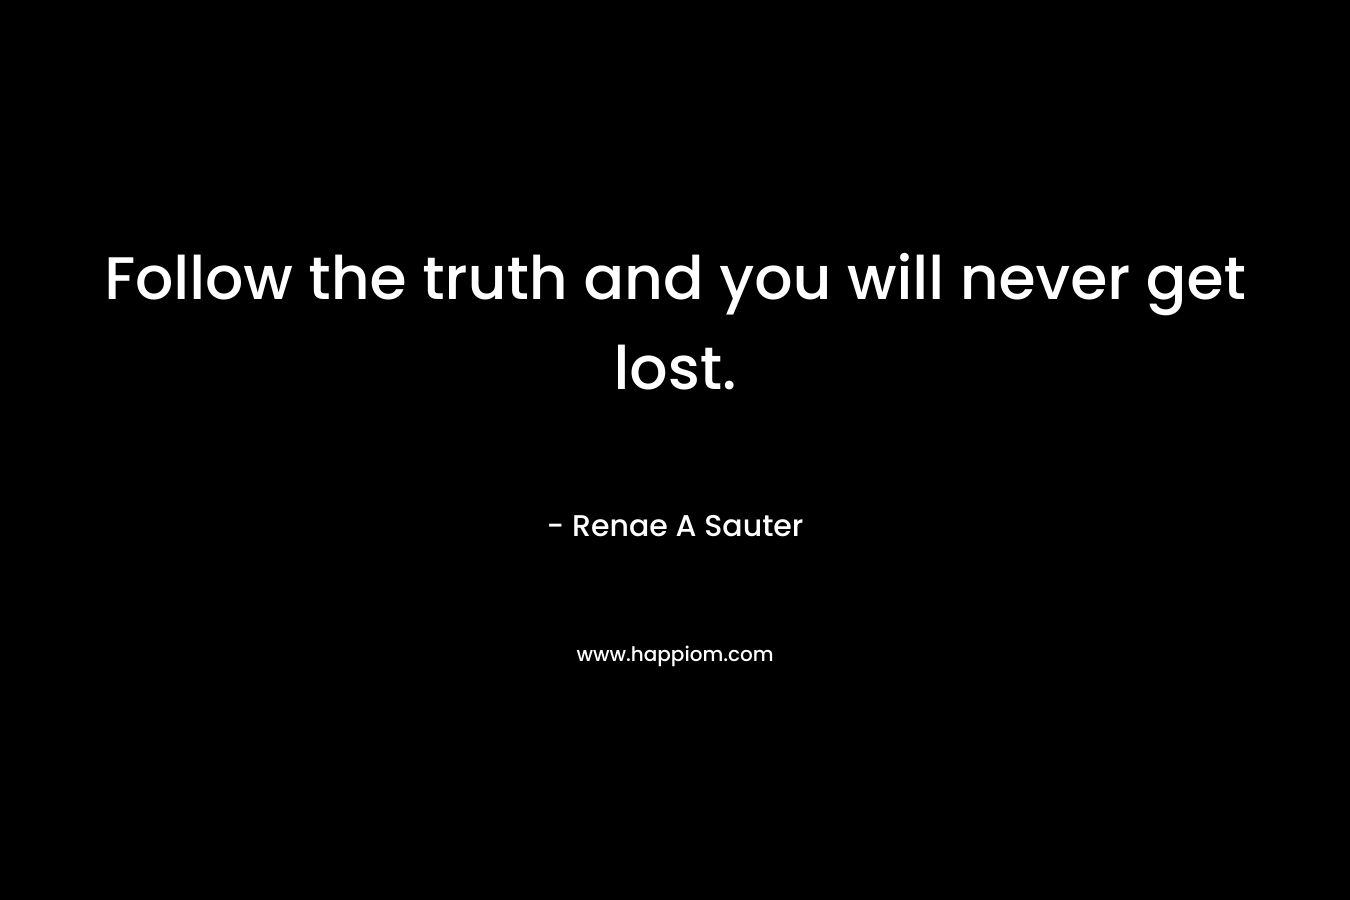 Follow the truth and you will never get lost.